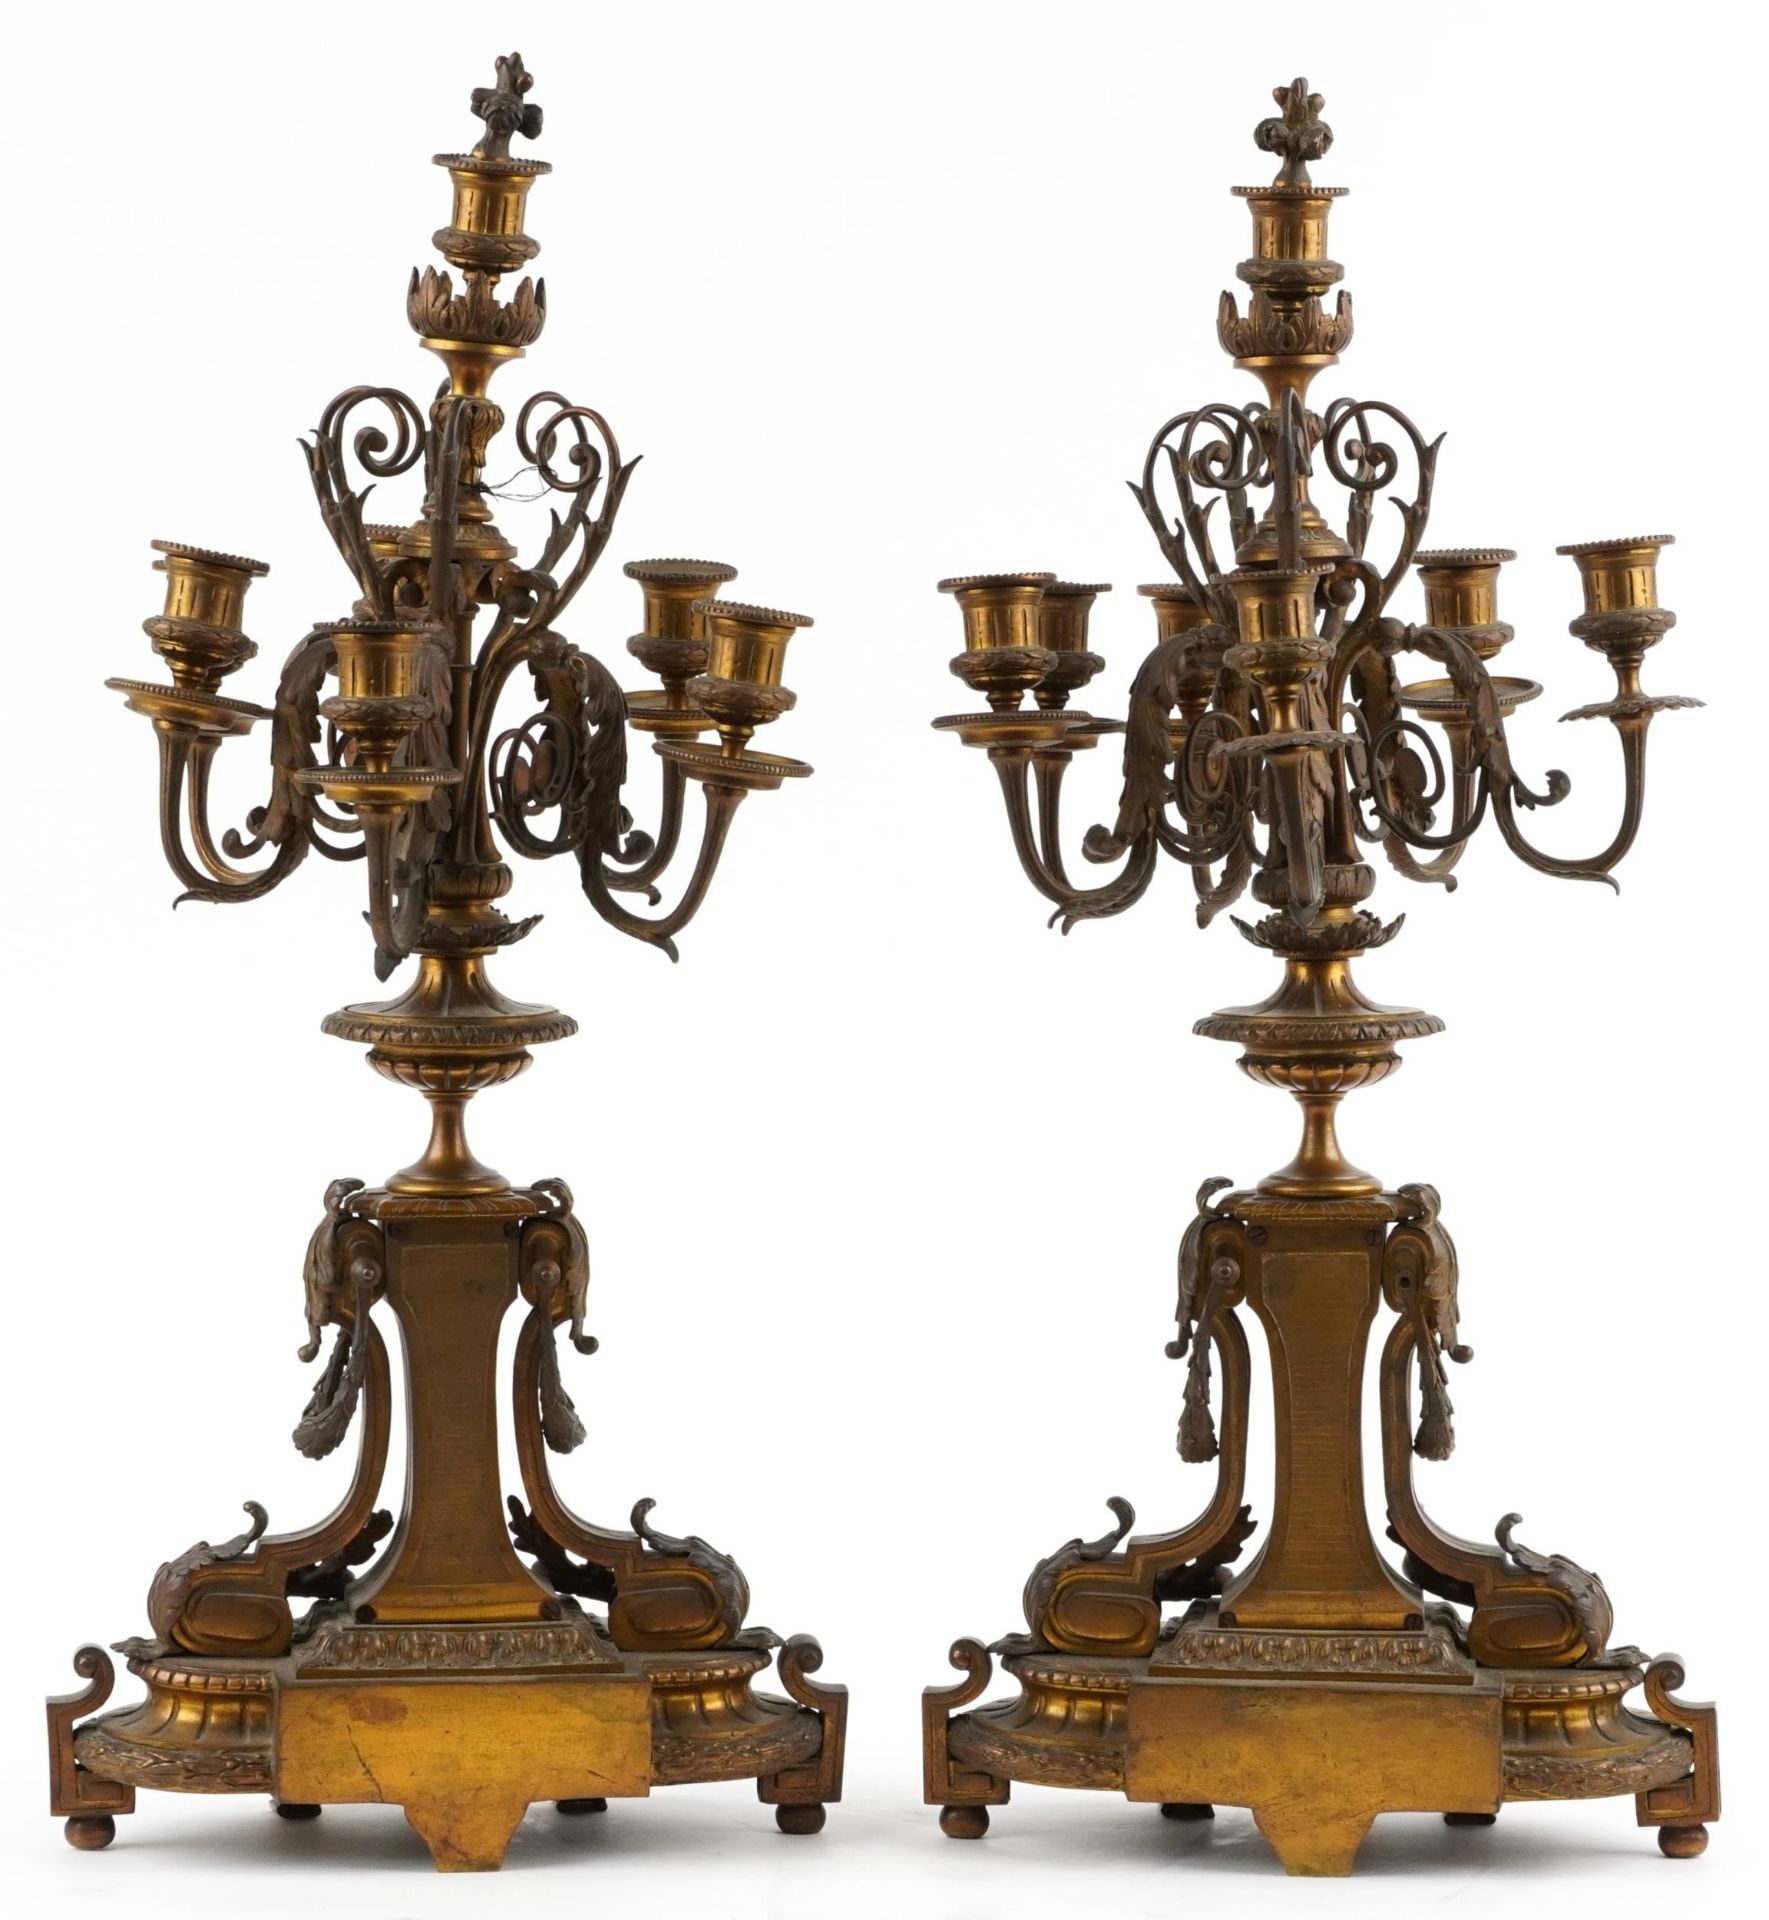 Large pair of 19th century French ormolu seven branch candelabras with urn supports and acanthus - Image 2 of 7